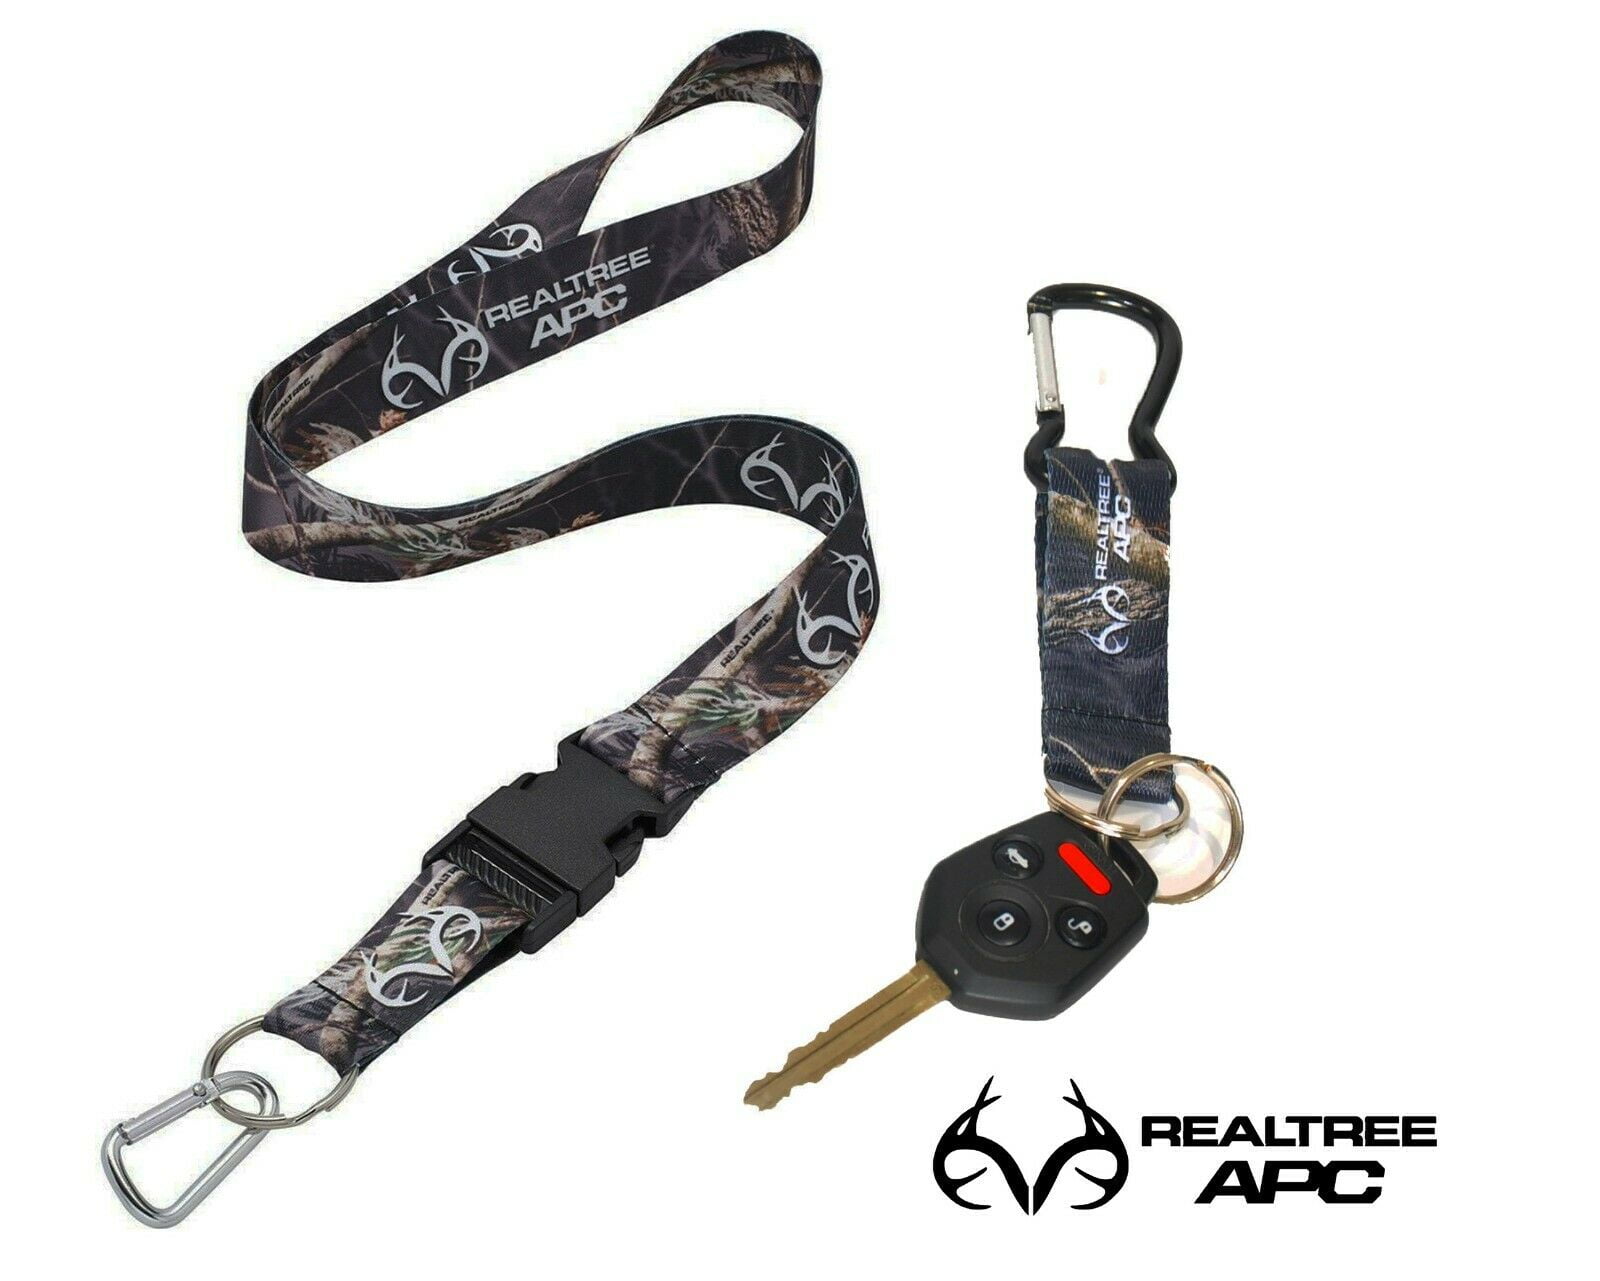 Details about   Pink Camo Mossy Oak CamoBiner Carabiner 3 Piece Set Keychain Clips Camouflage 